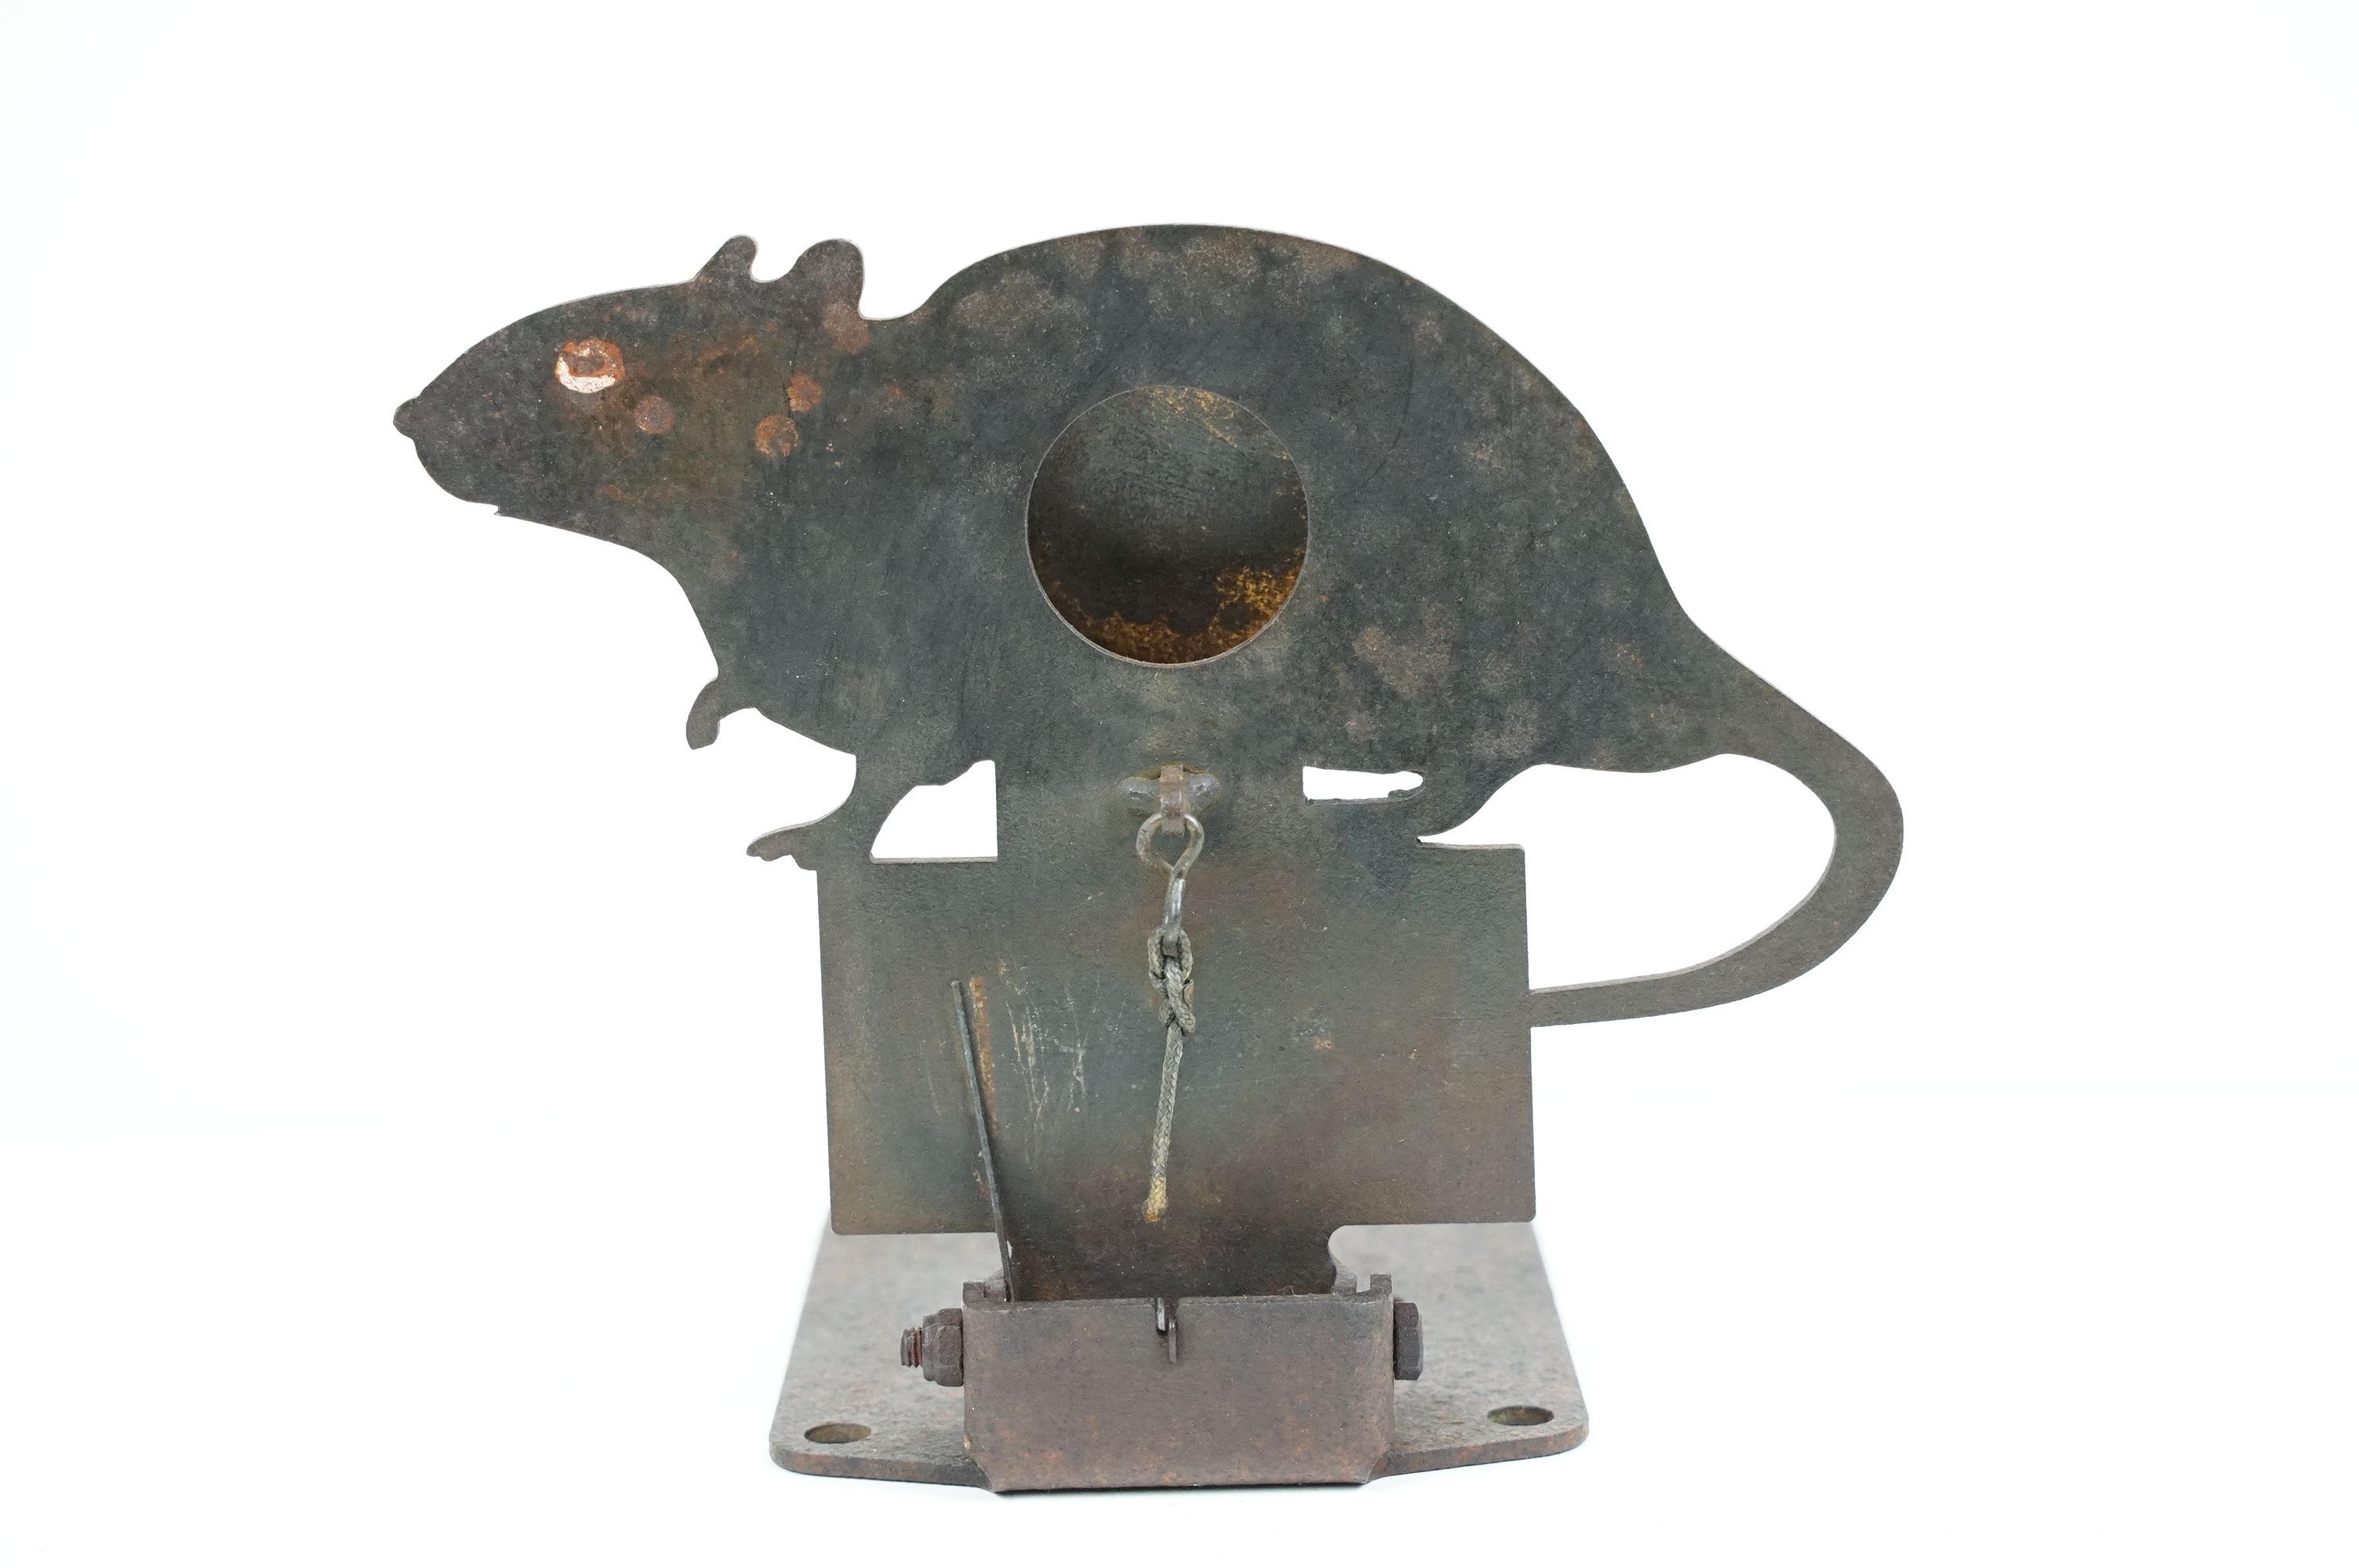 Vintage iron target practice in the form of a rat with collapsible mechanism, approx 18cm tall